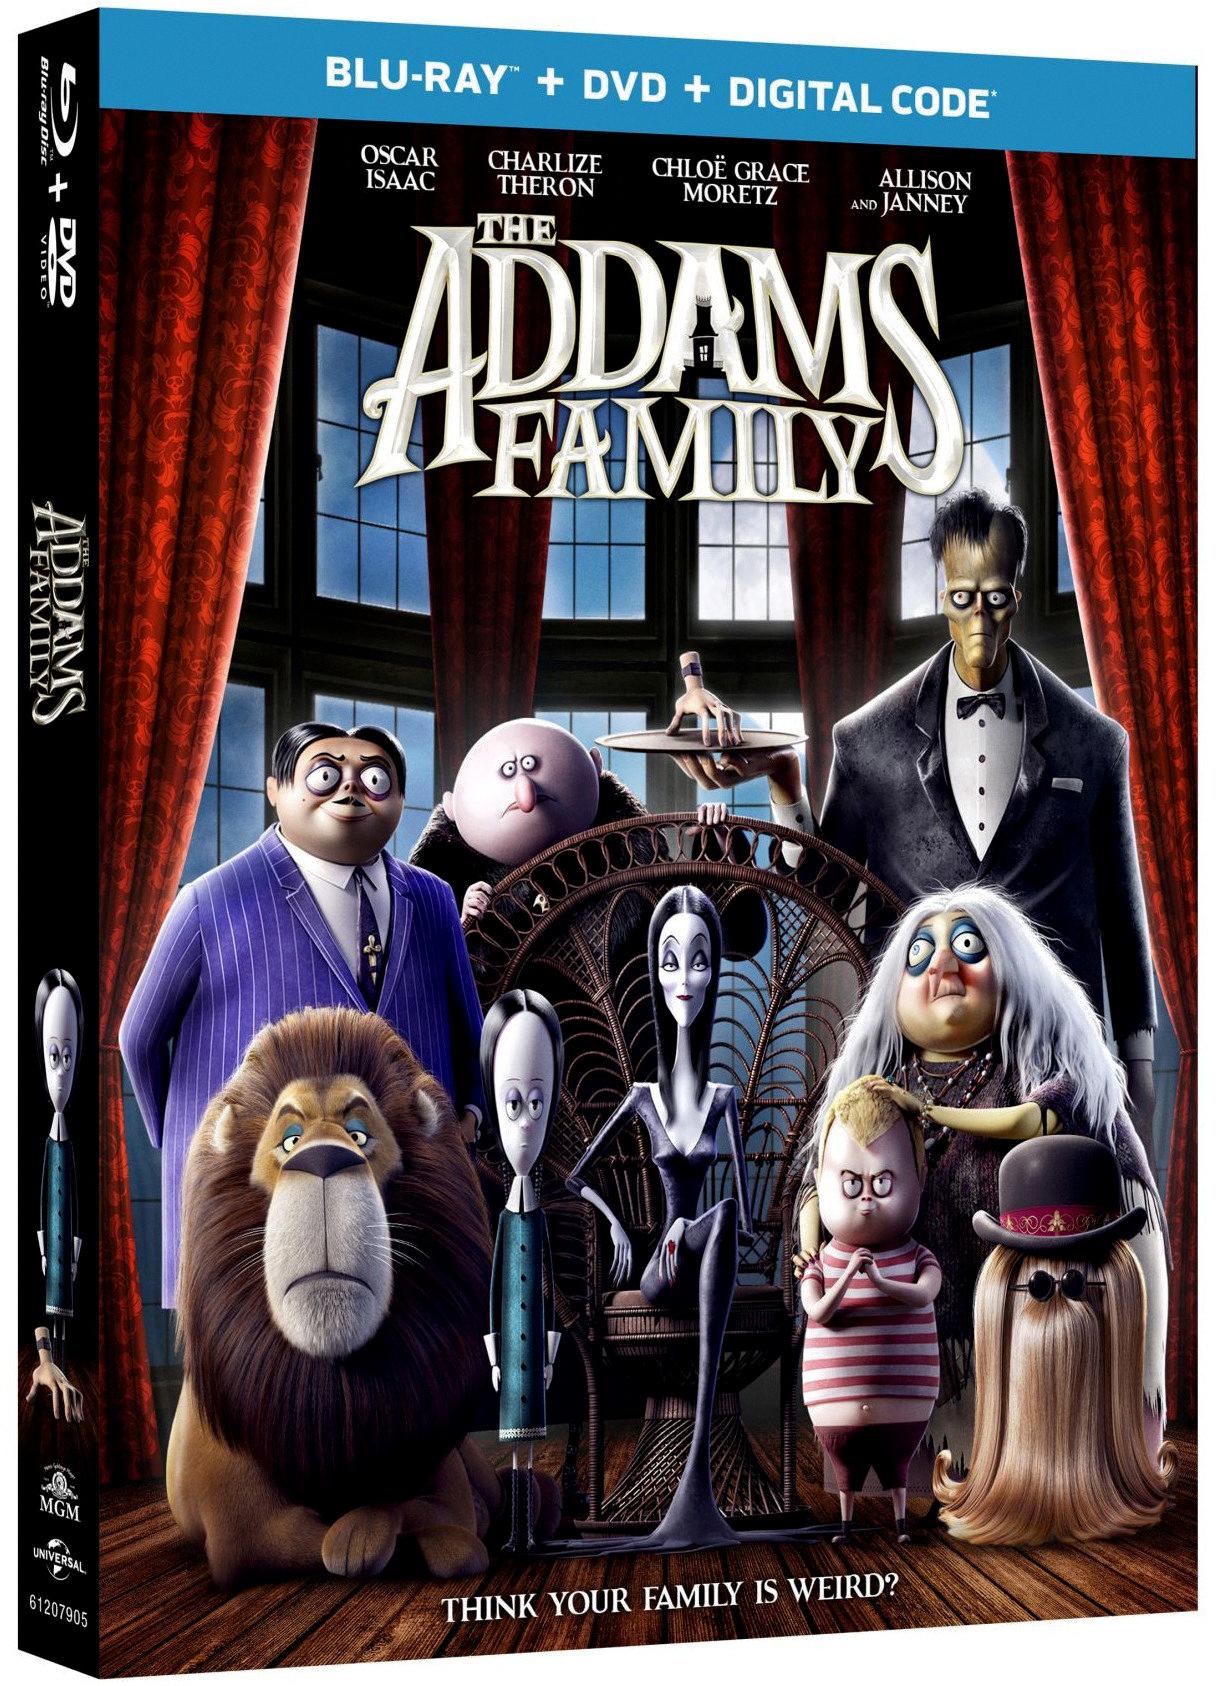 are the addams family human